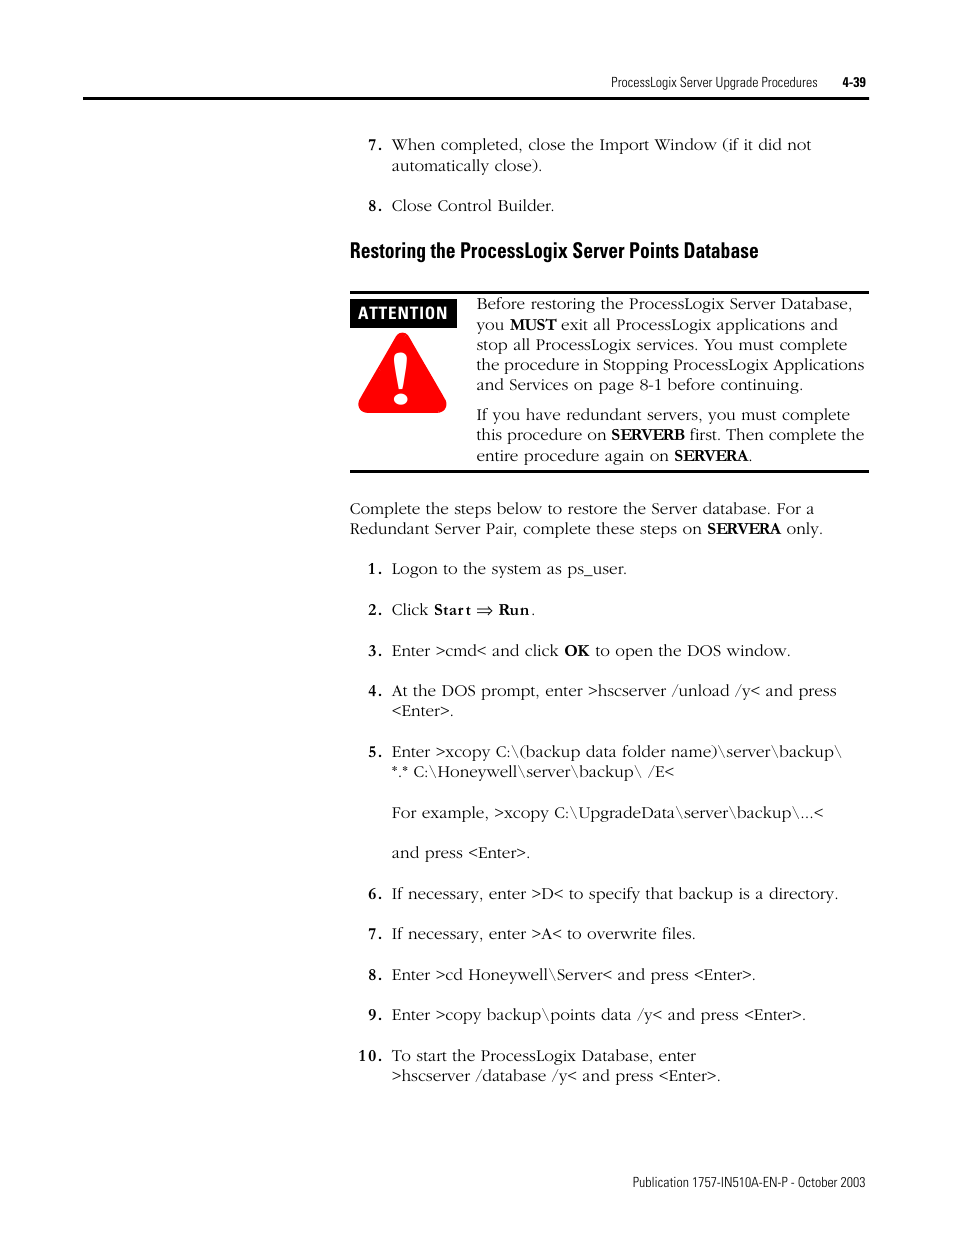 Restoring the processlogix server points database | Rockwell Automation 1757-SWKIT5100 ProcessLogix R510.0 Installation and Upgrade Guide User Manual | Page 123 / 271